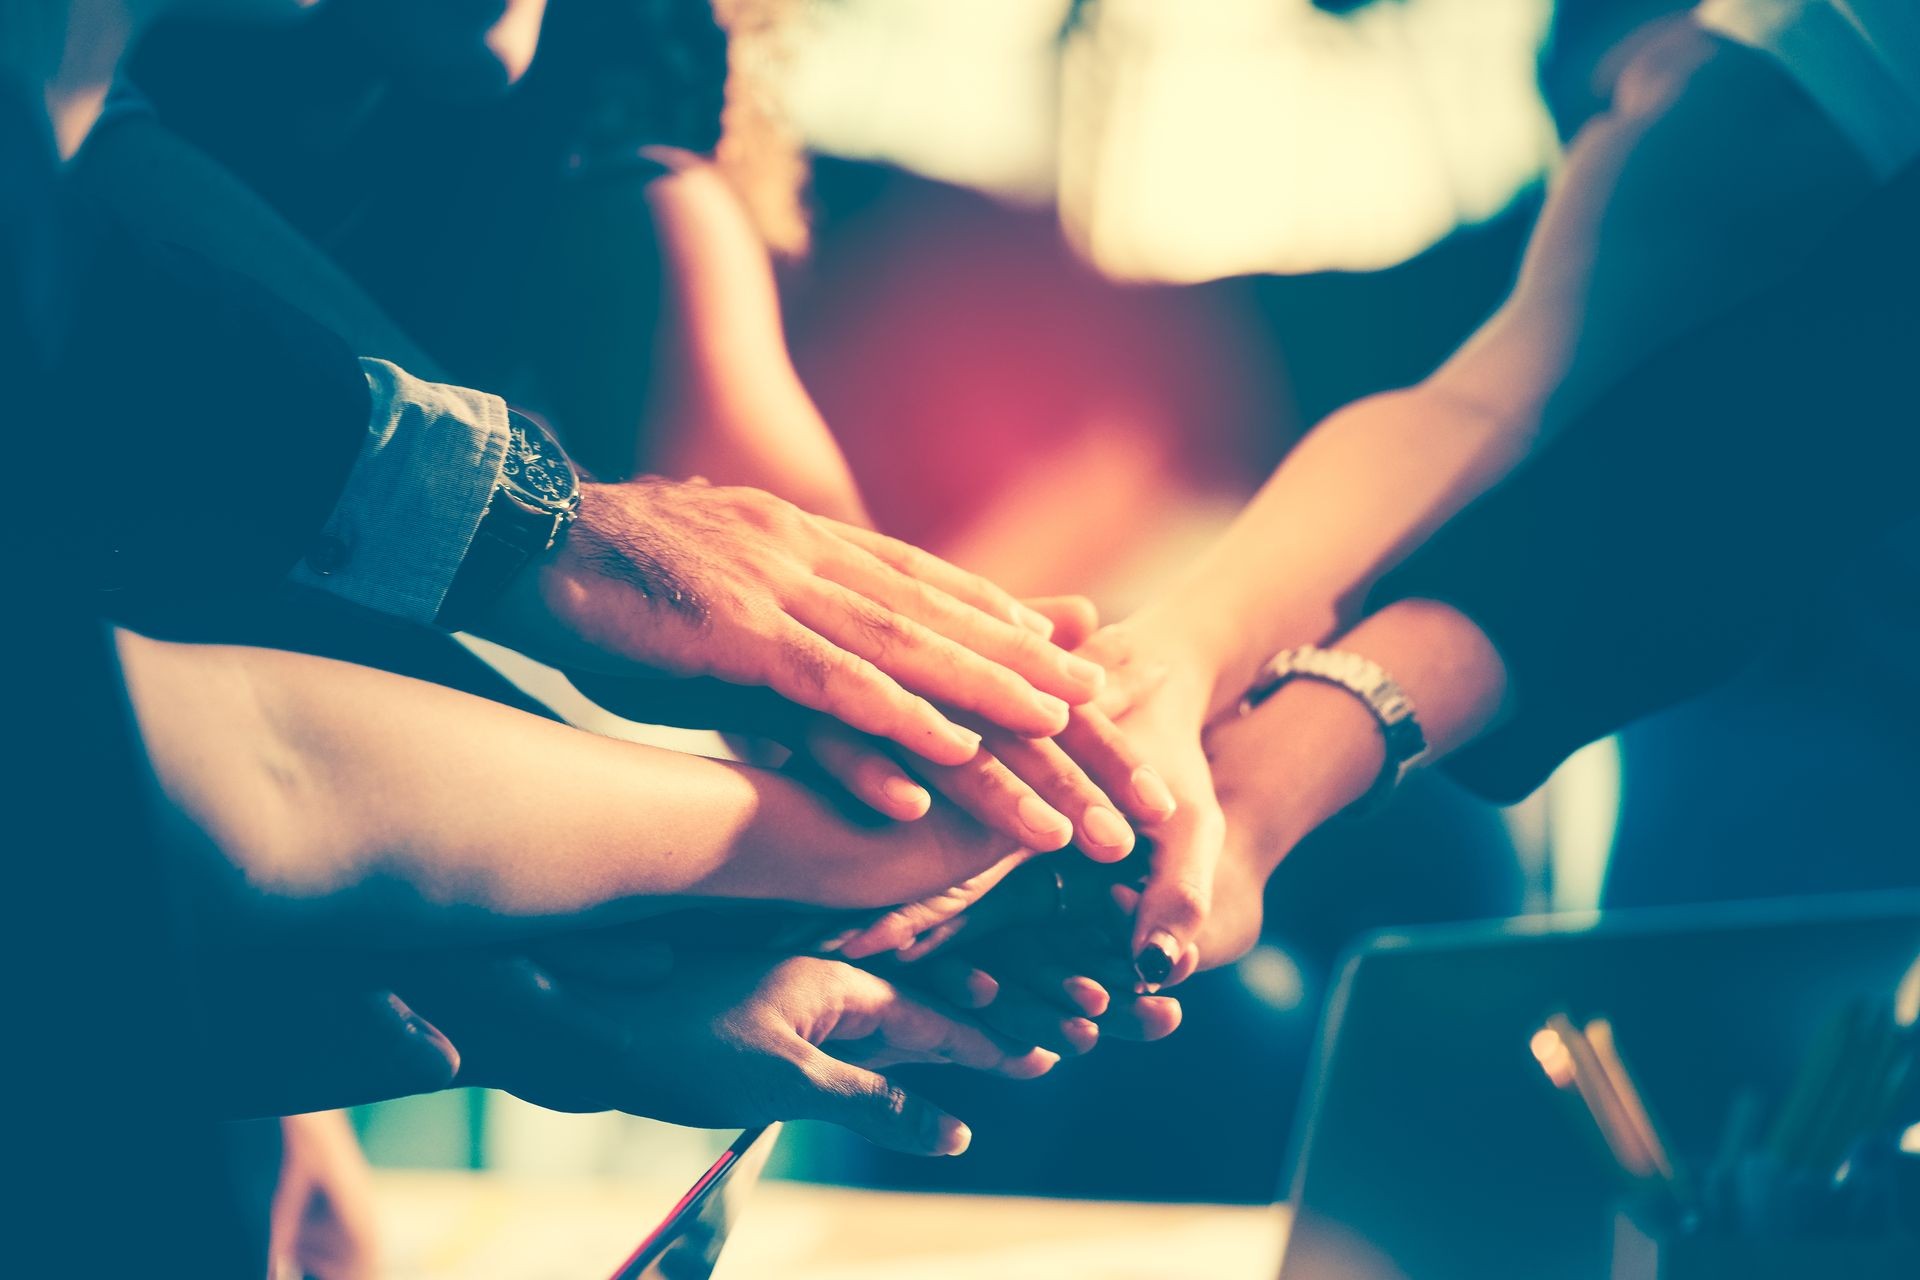 Diversity group of successful business people showing unity with their hands together, Image of businesspeople hands on top of each other as symbol of their partnership. Teamwork agreement concept. 